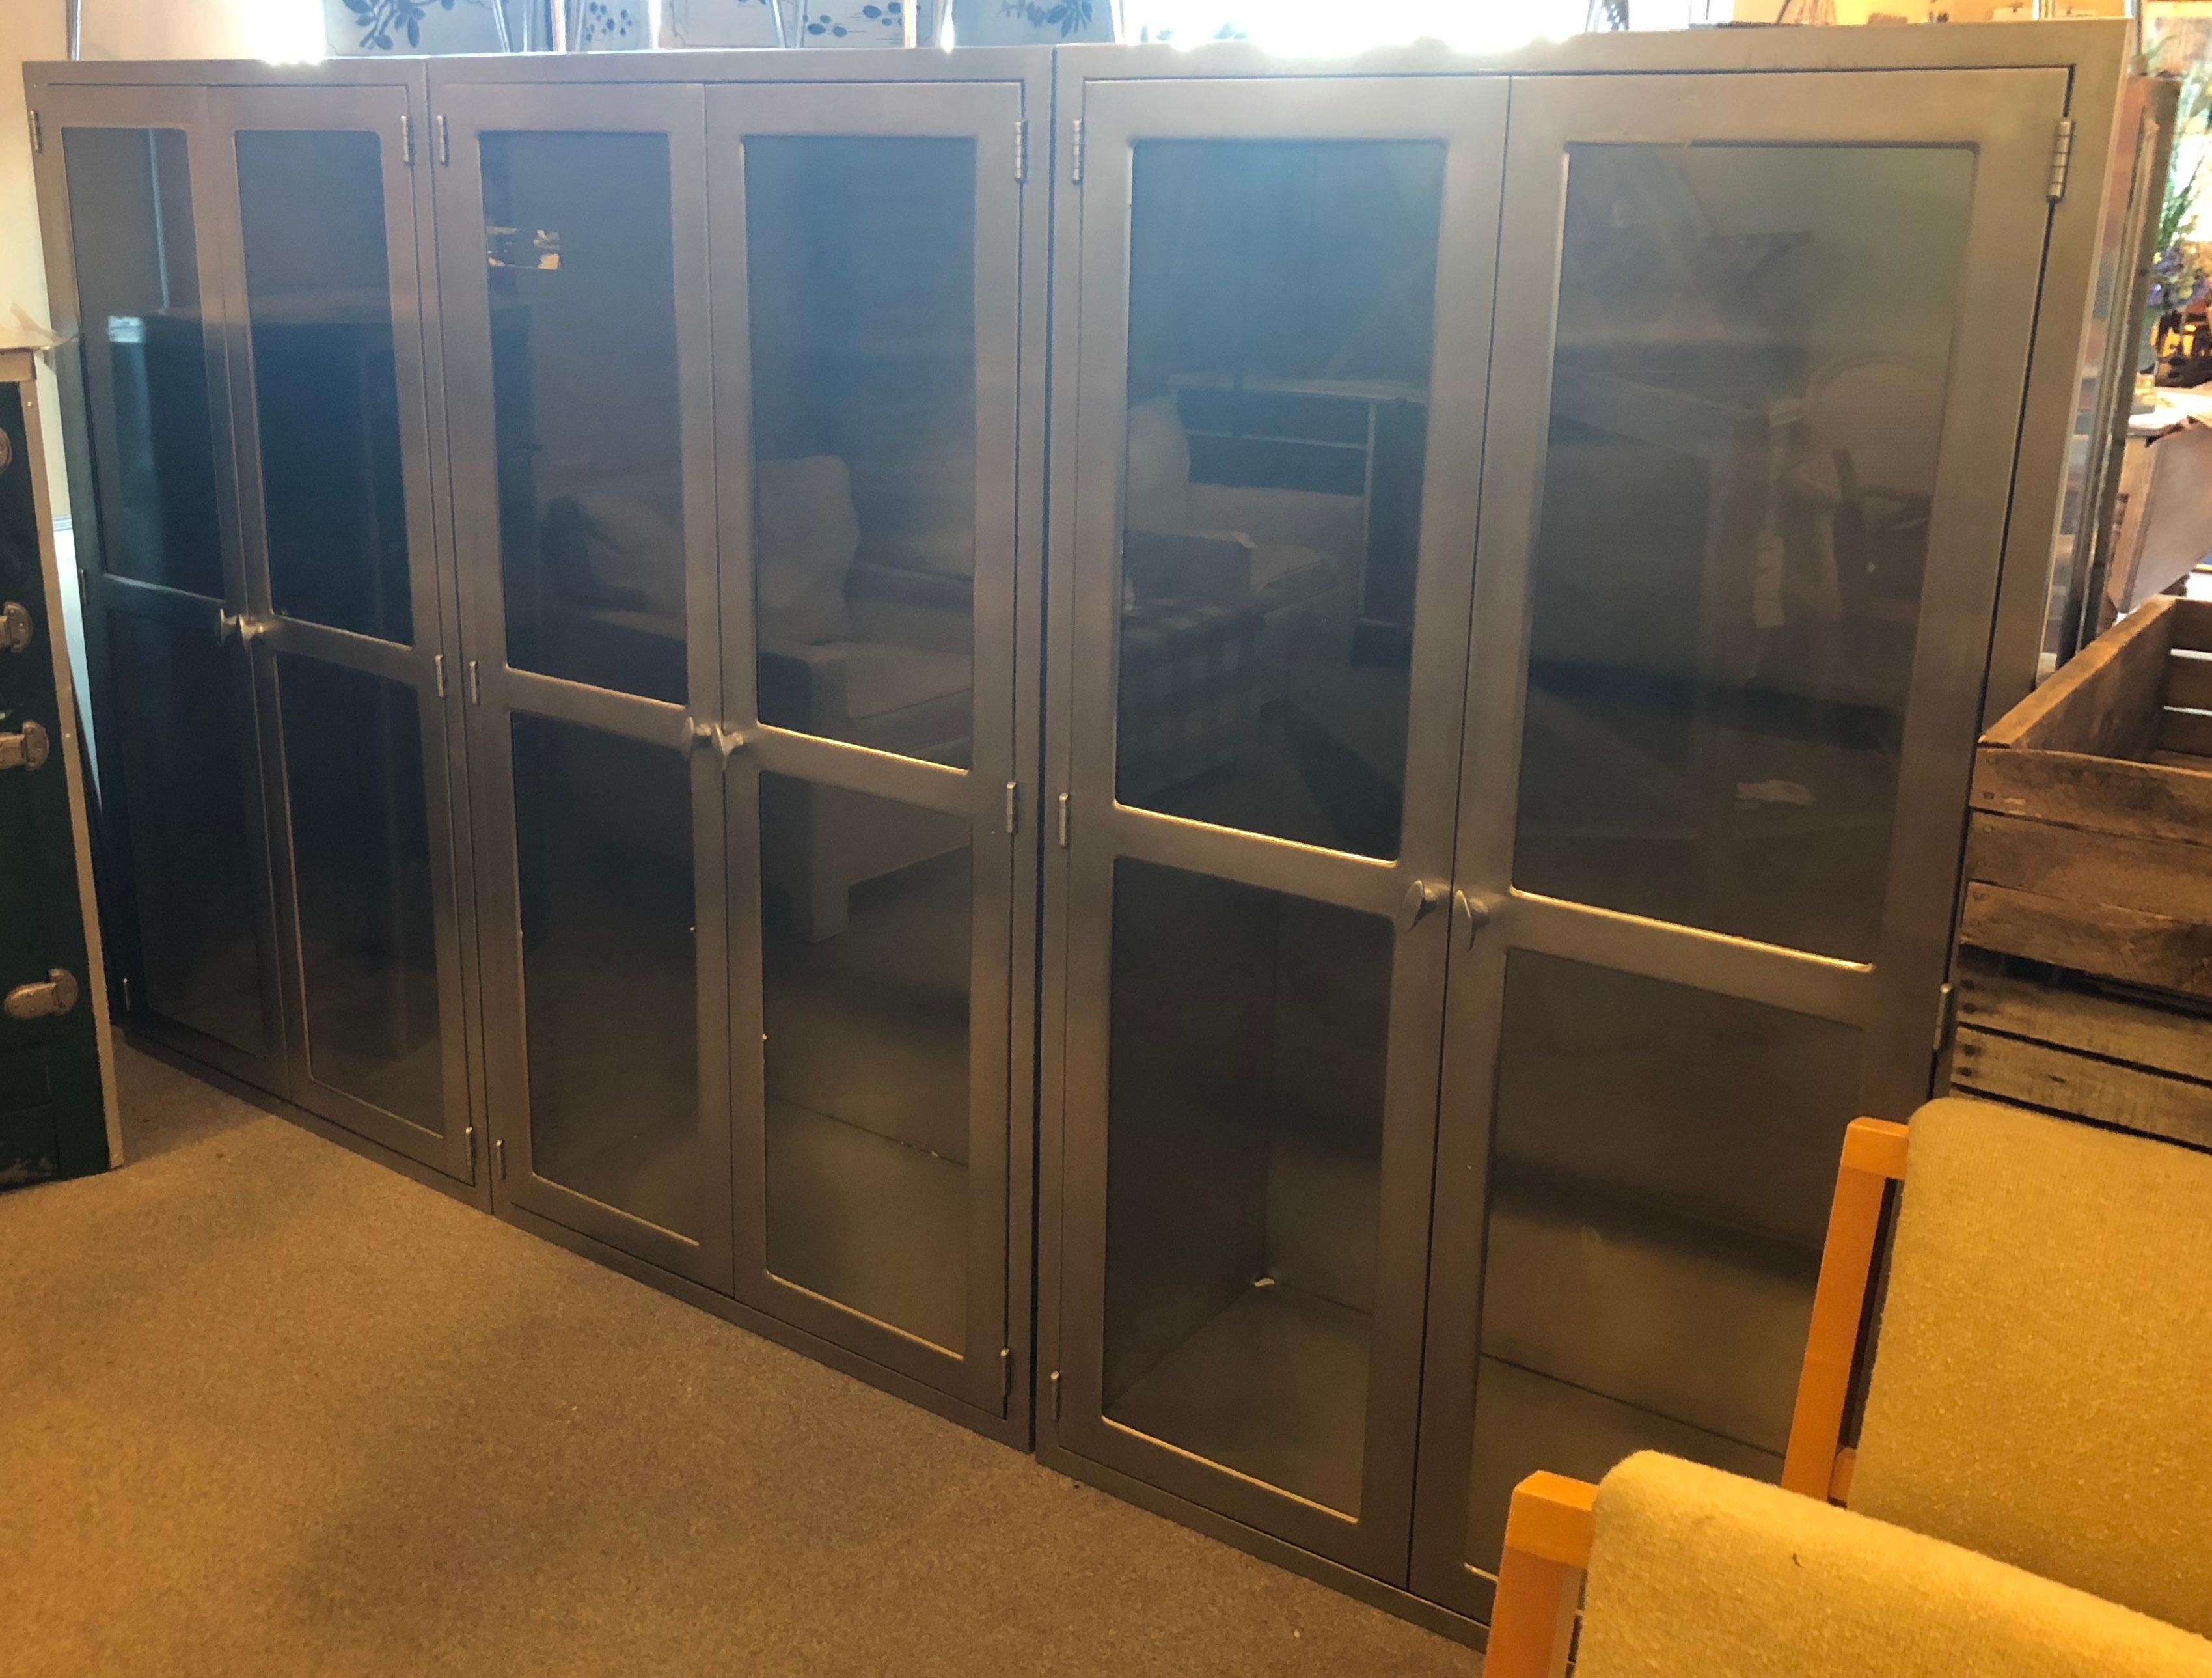 Medical cabinets of stainless steel and glass. Set of 3. Two adjustable stainless steel shelves per cabinet or six shelves in total. These were removed from a hospital as built-ins. In excellent condition. Ideal for building into new construction.